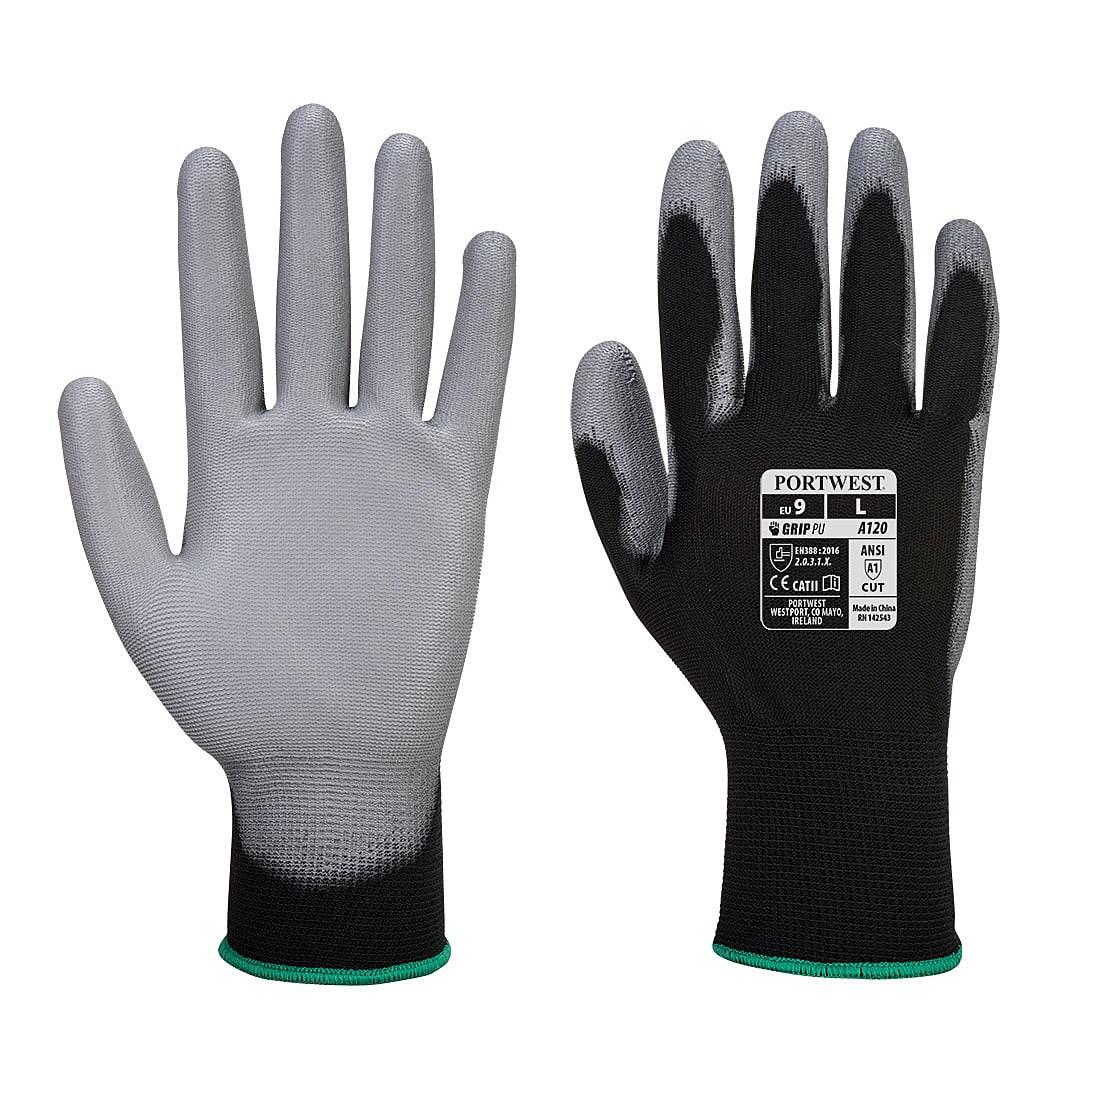 Portwest PU Palm Gloves in Black / Grey (Product Code: A120)